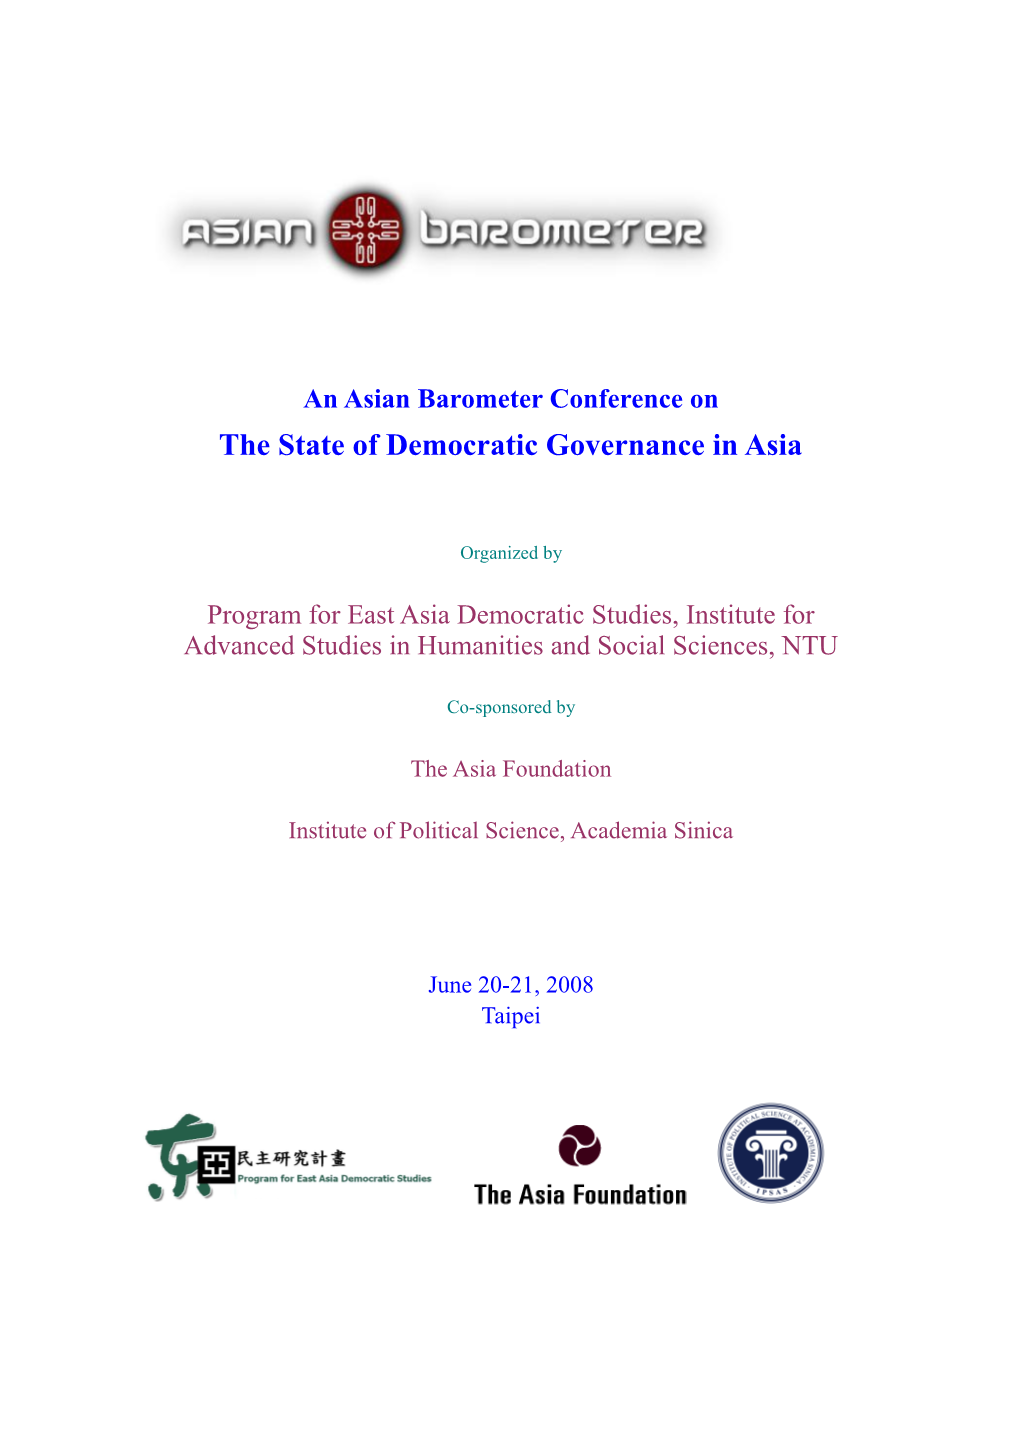 The State of Democratic Governance in Asia